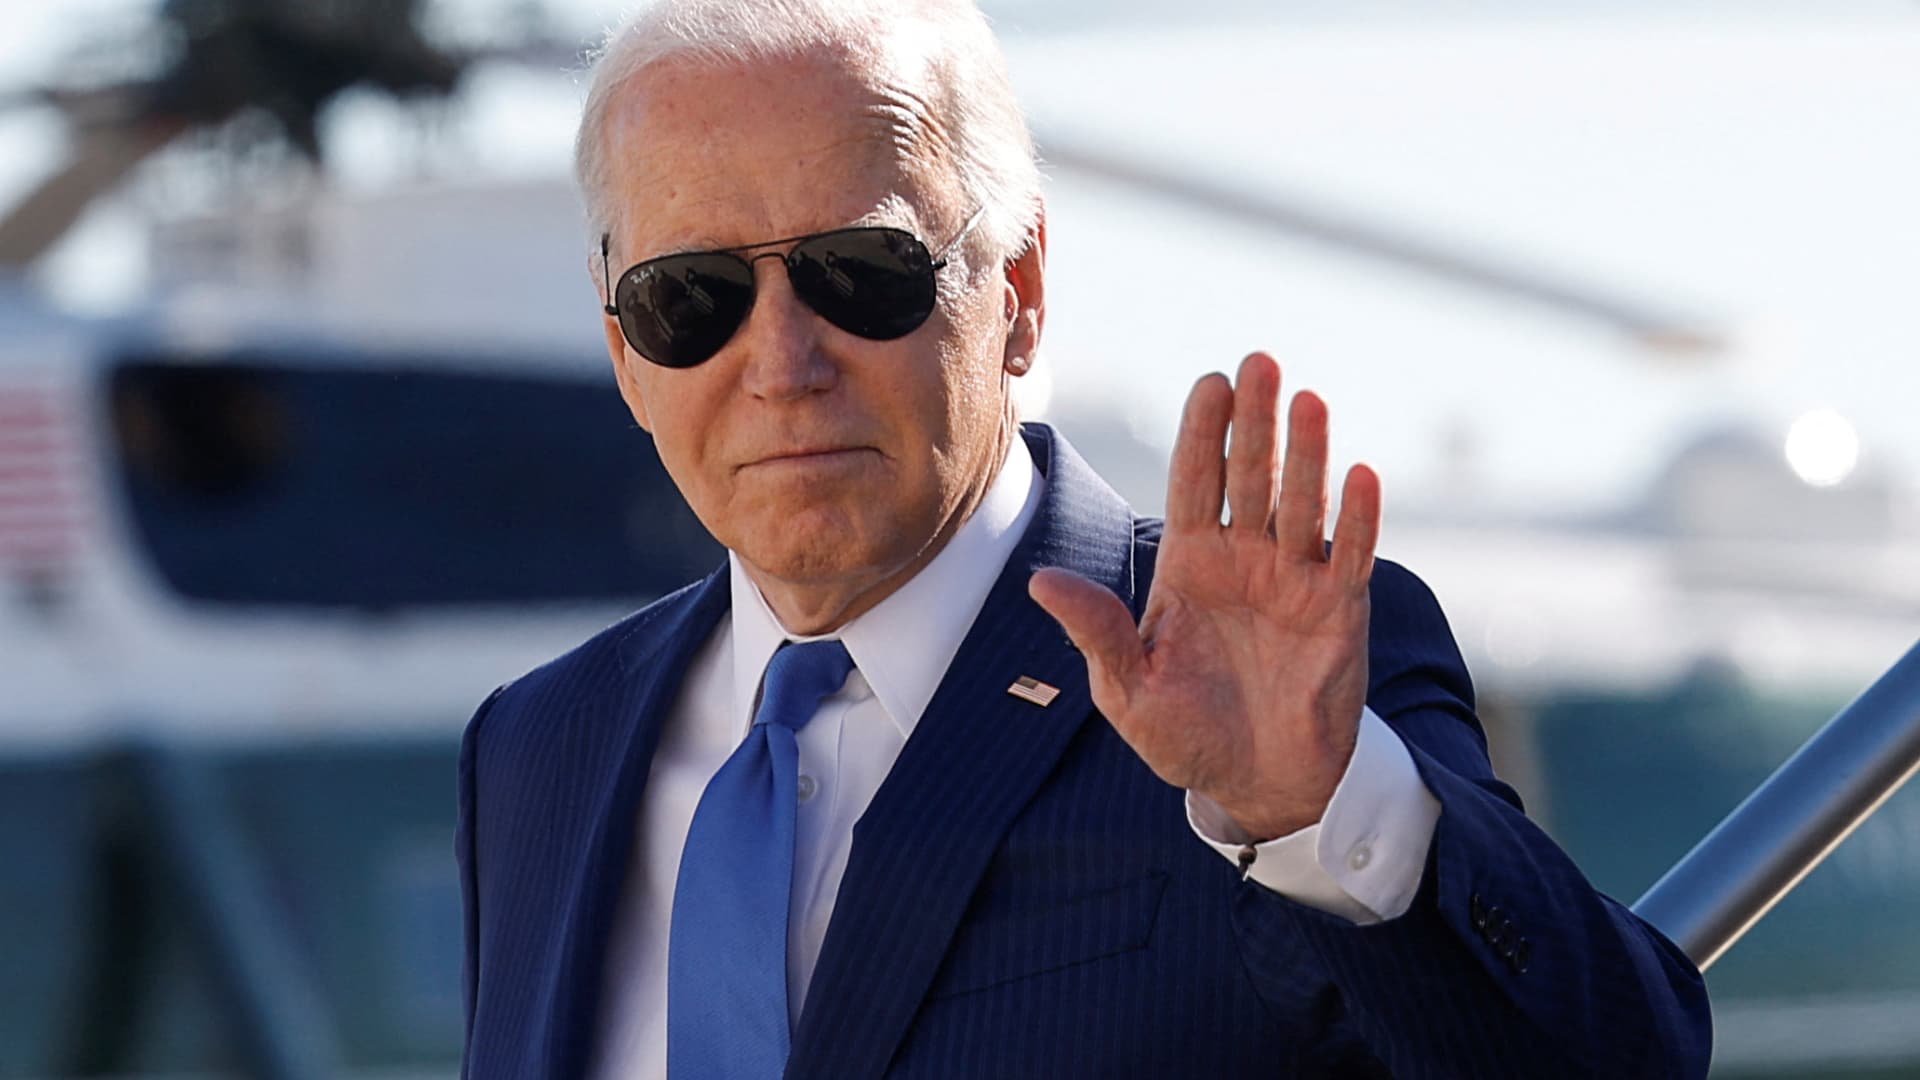 Biden campaign debuts official TikTok account, but app is still banned on most government devices